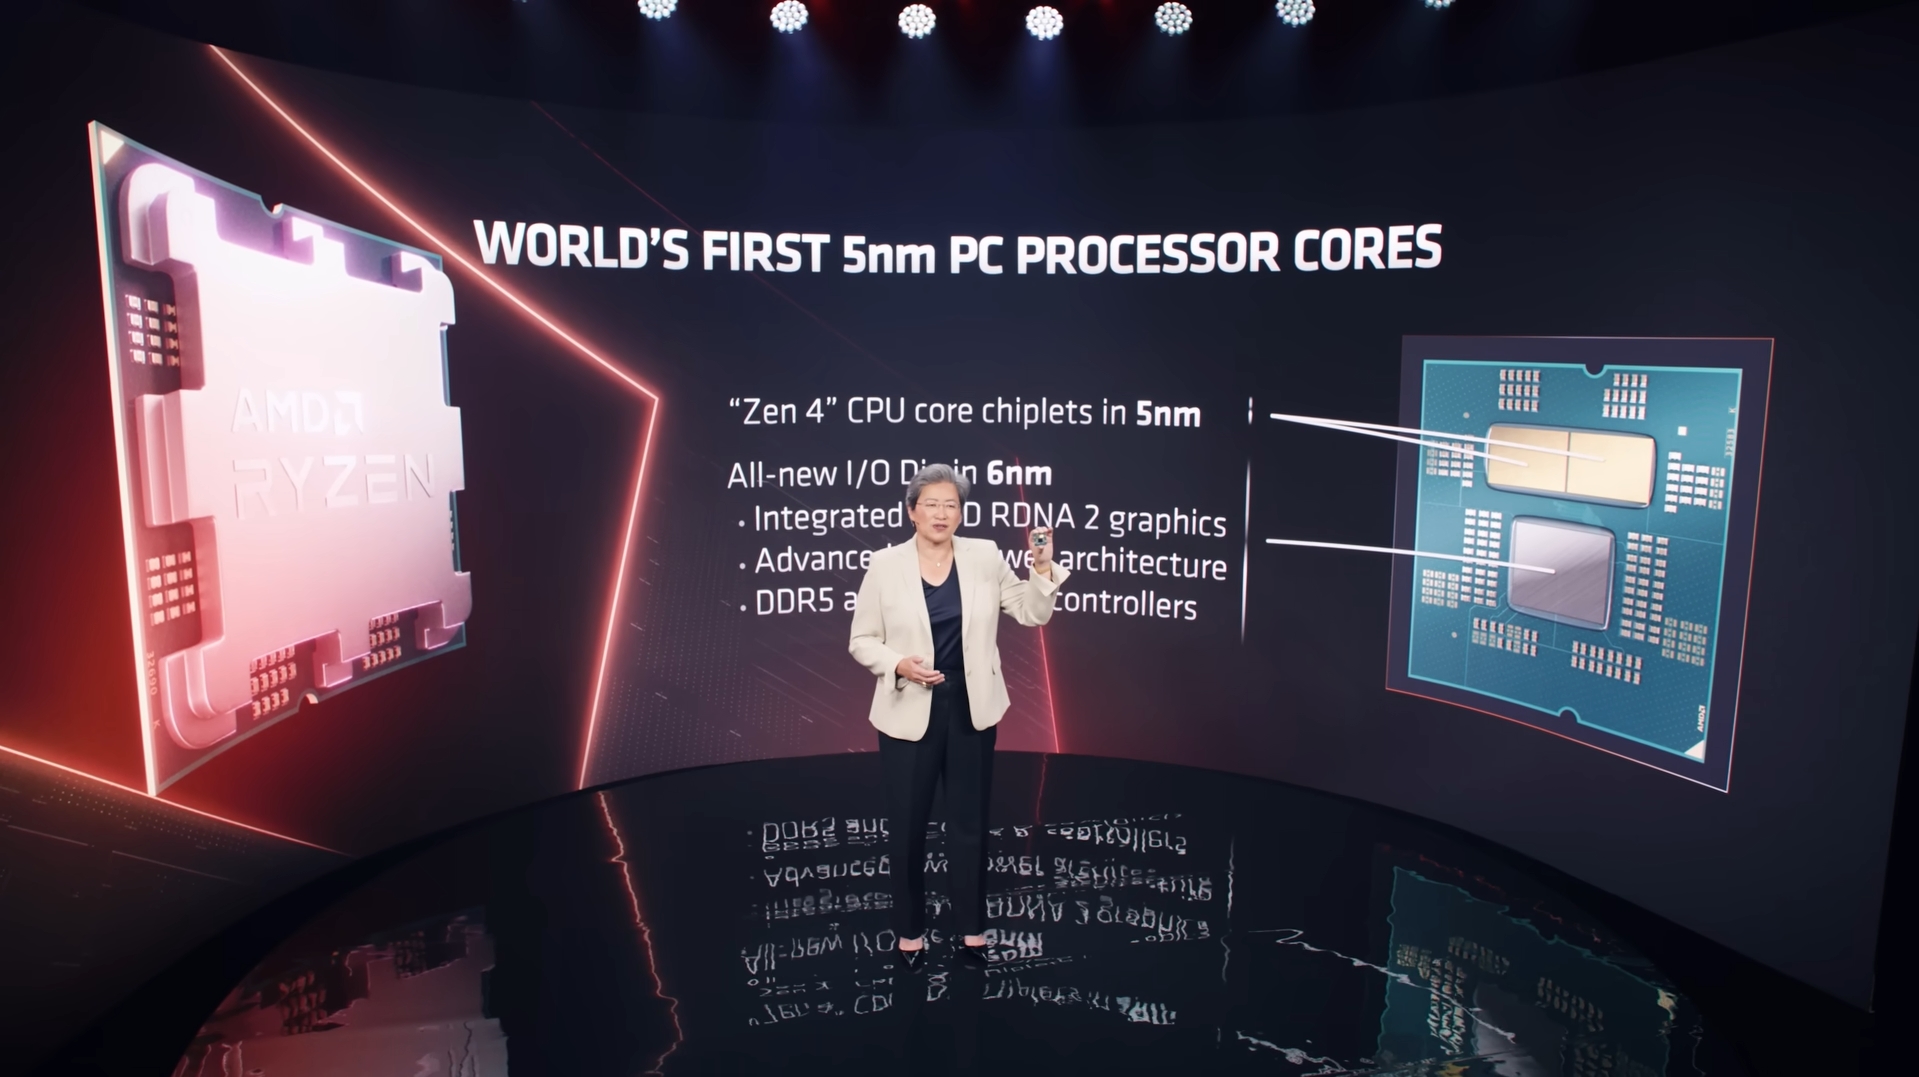 World's First 5nm PC Processor Cores